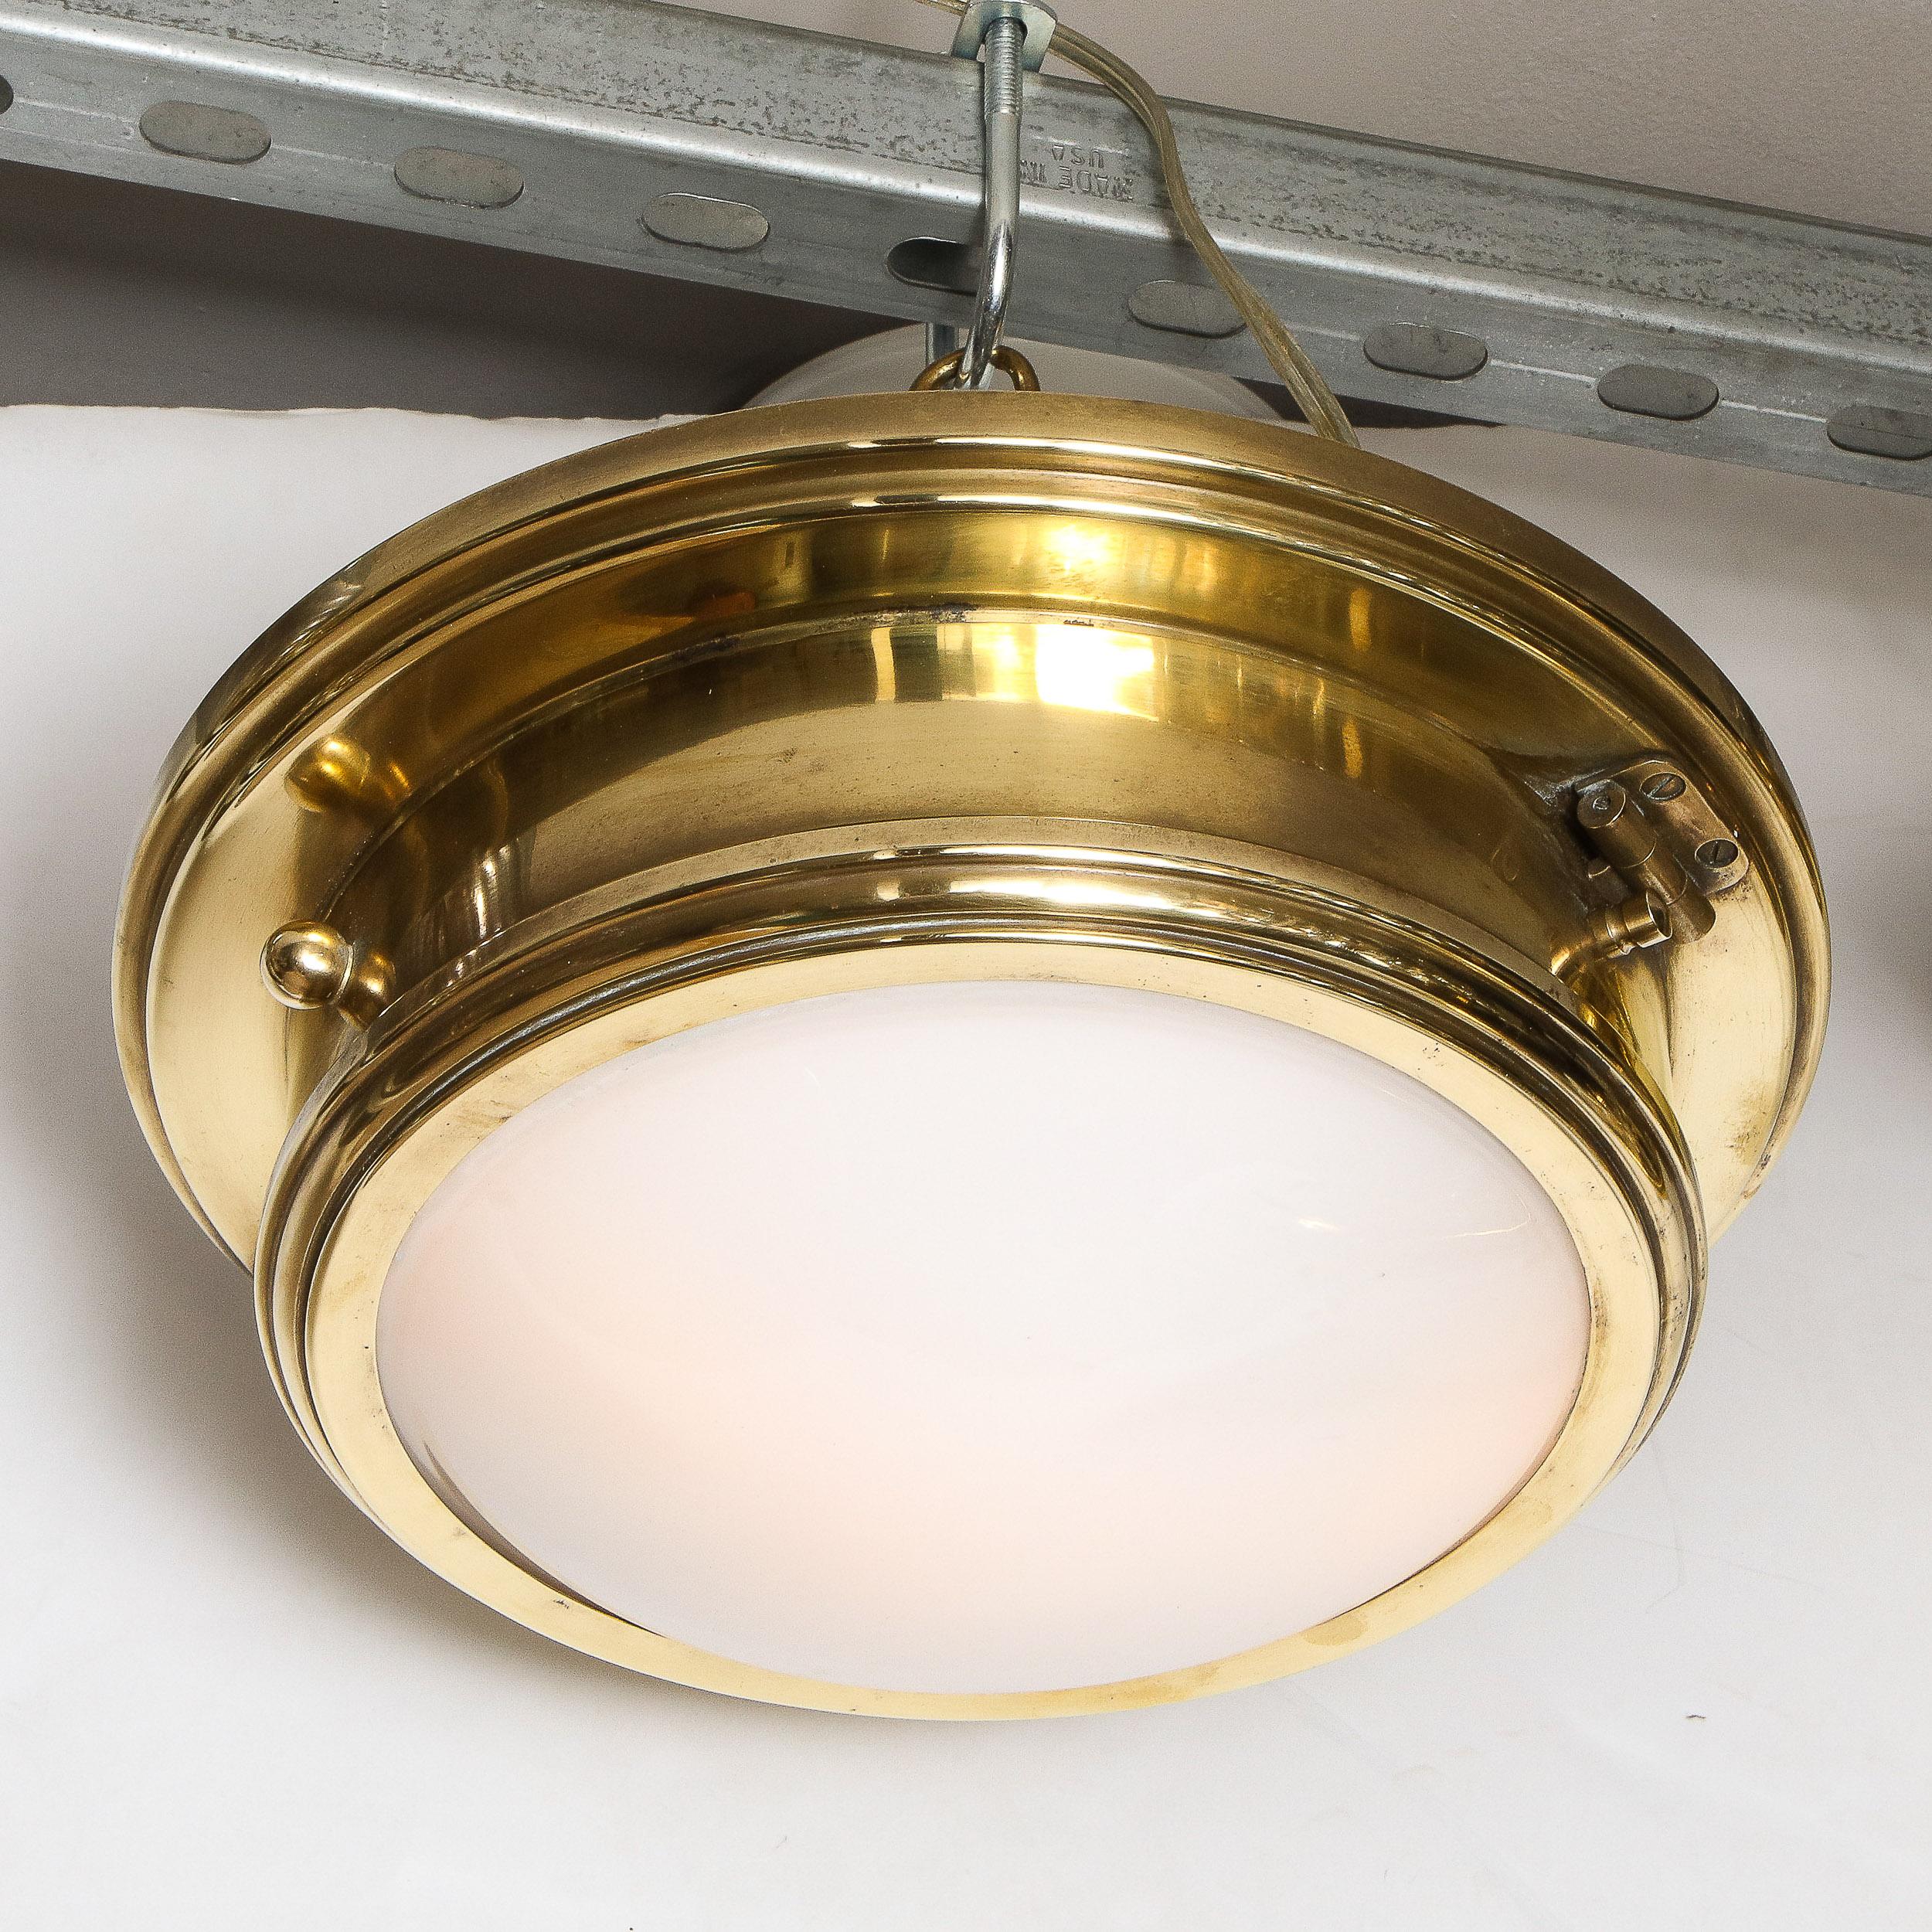 This refined modernist flush mount was realized by Ralph Lauren Home in the United States during the latter half of the 20th Century. The fixture offers a conical form with a stepped and channeled base that cantilevers slightly over the body of the